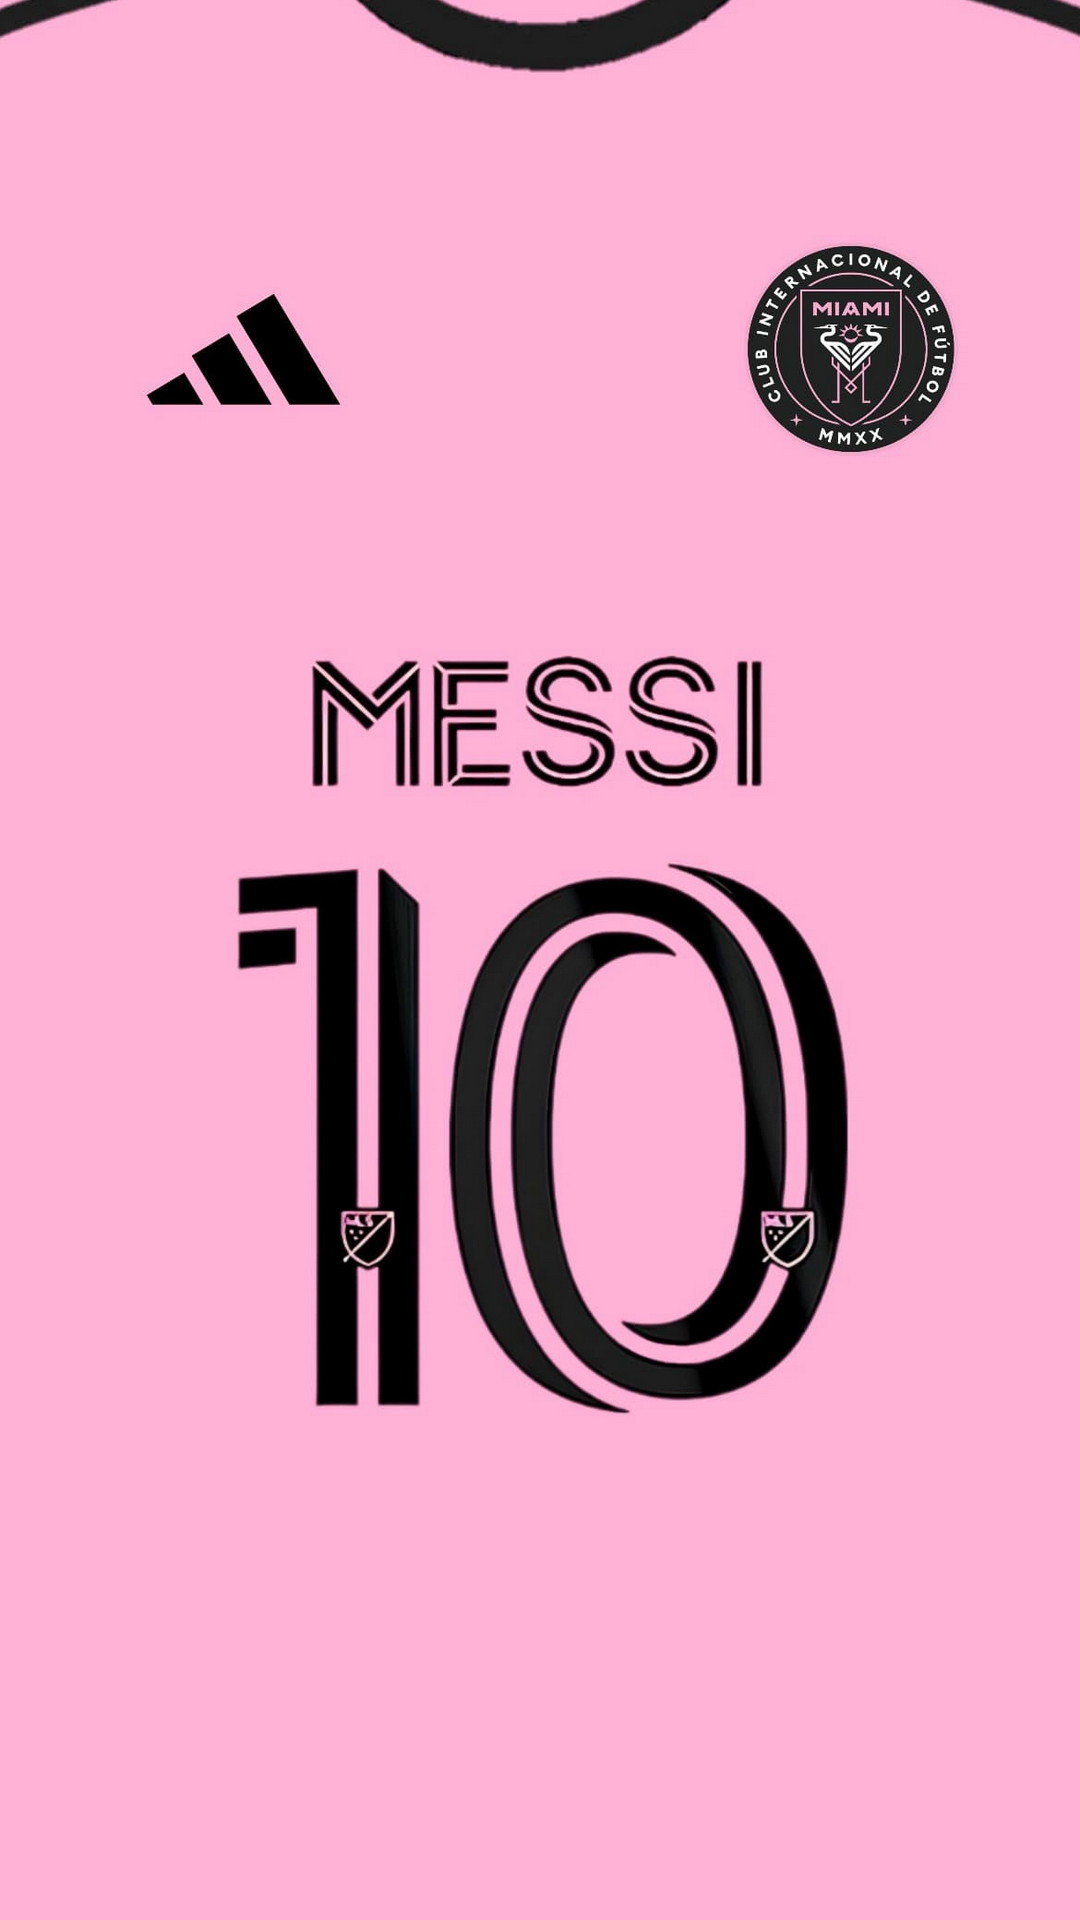 Wallpaper Android Lionel Messi Inter Miami with high-resolution 1080x1920 pixel. You can use this wallpaper for your Android backgrounds, Tablet, Samsung Screensavers, Mobile Phone Lock Screen and another Smartphones device